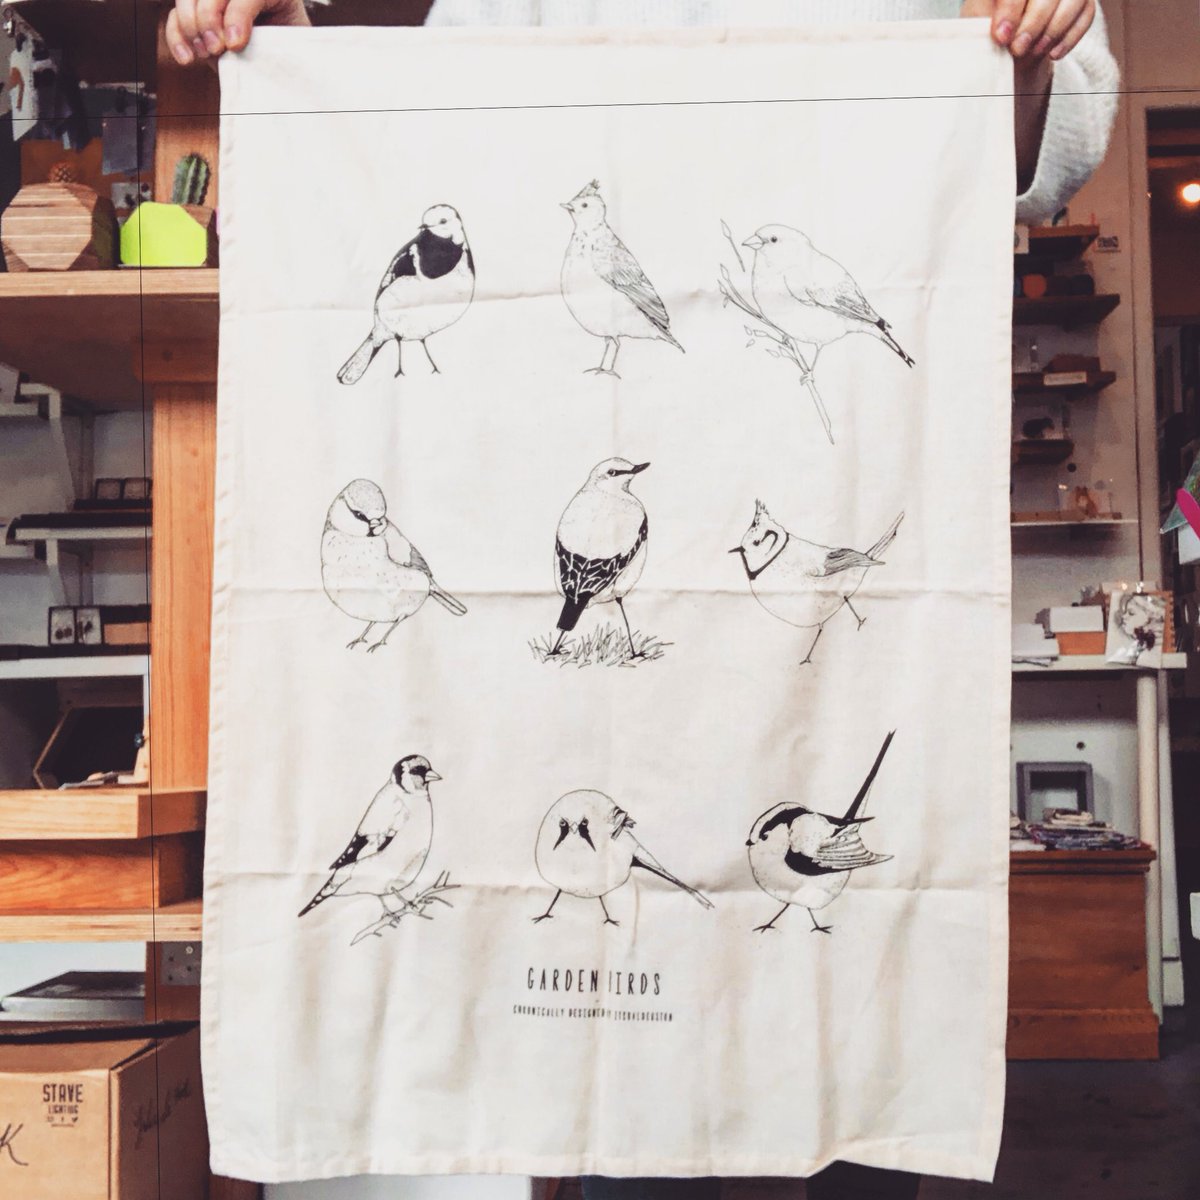 Grace your kitchen with these lovely #GardenBird tea towels by @ItsBalderston - We have more tea towels from her collection in store! #teatowel